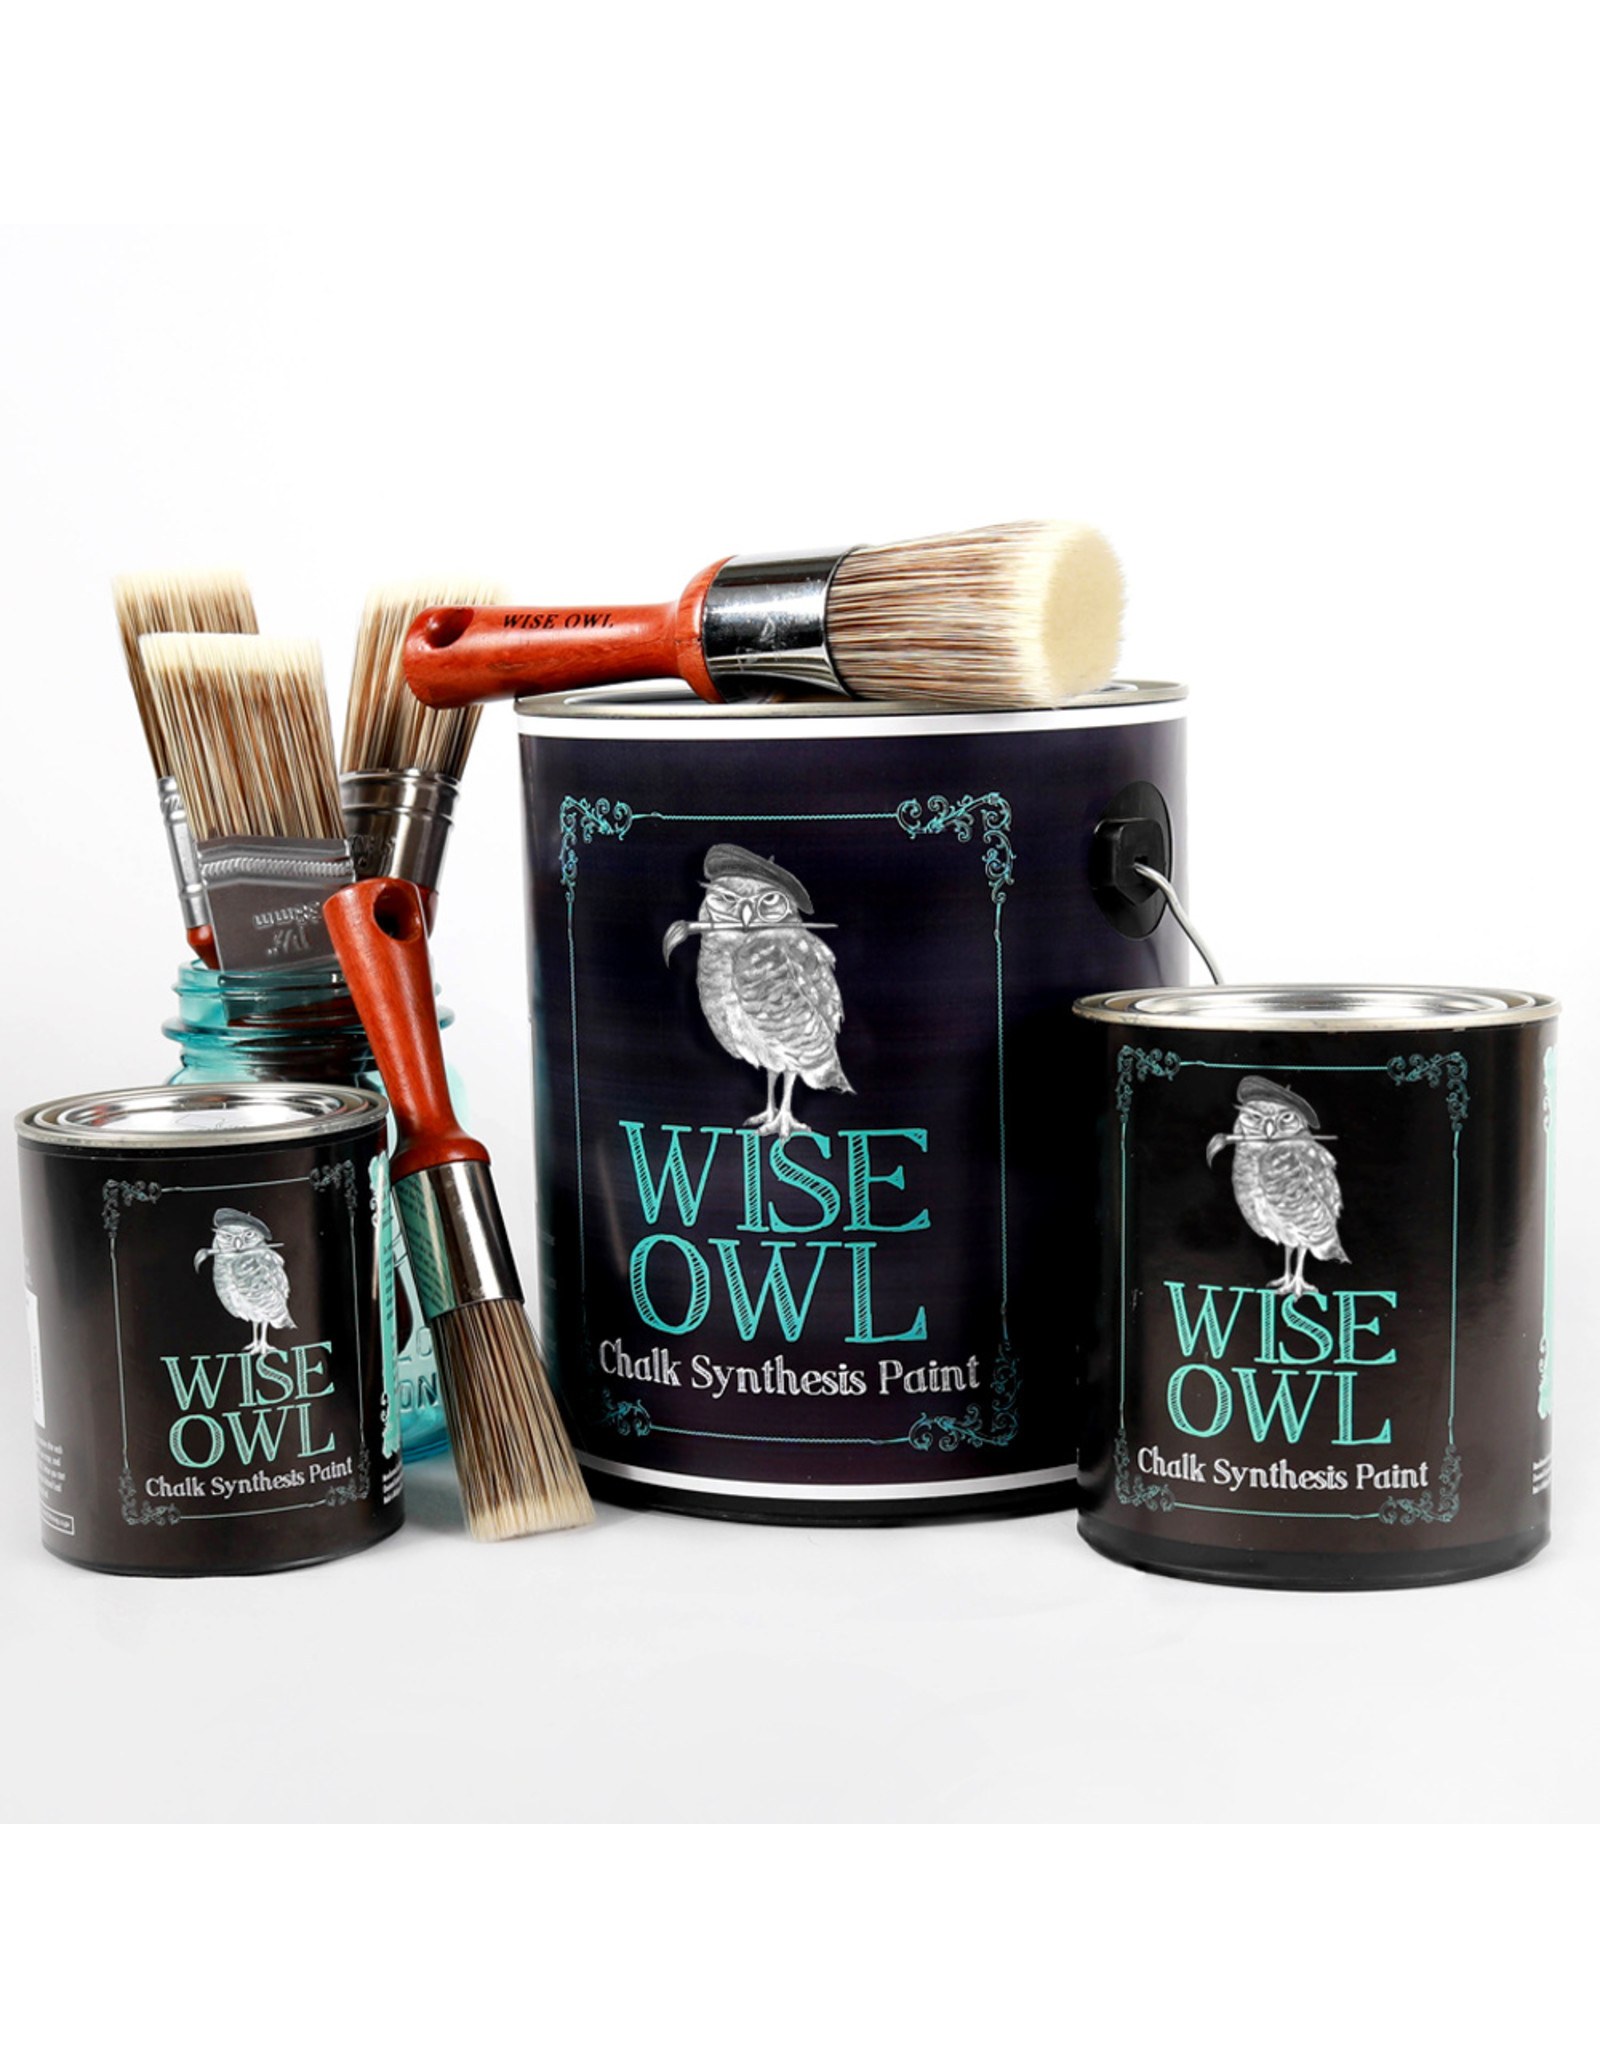 Wise Owl Paint Chalk Synthesis Paint-1987 Pint